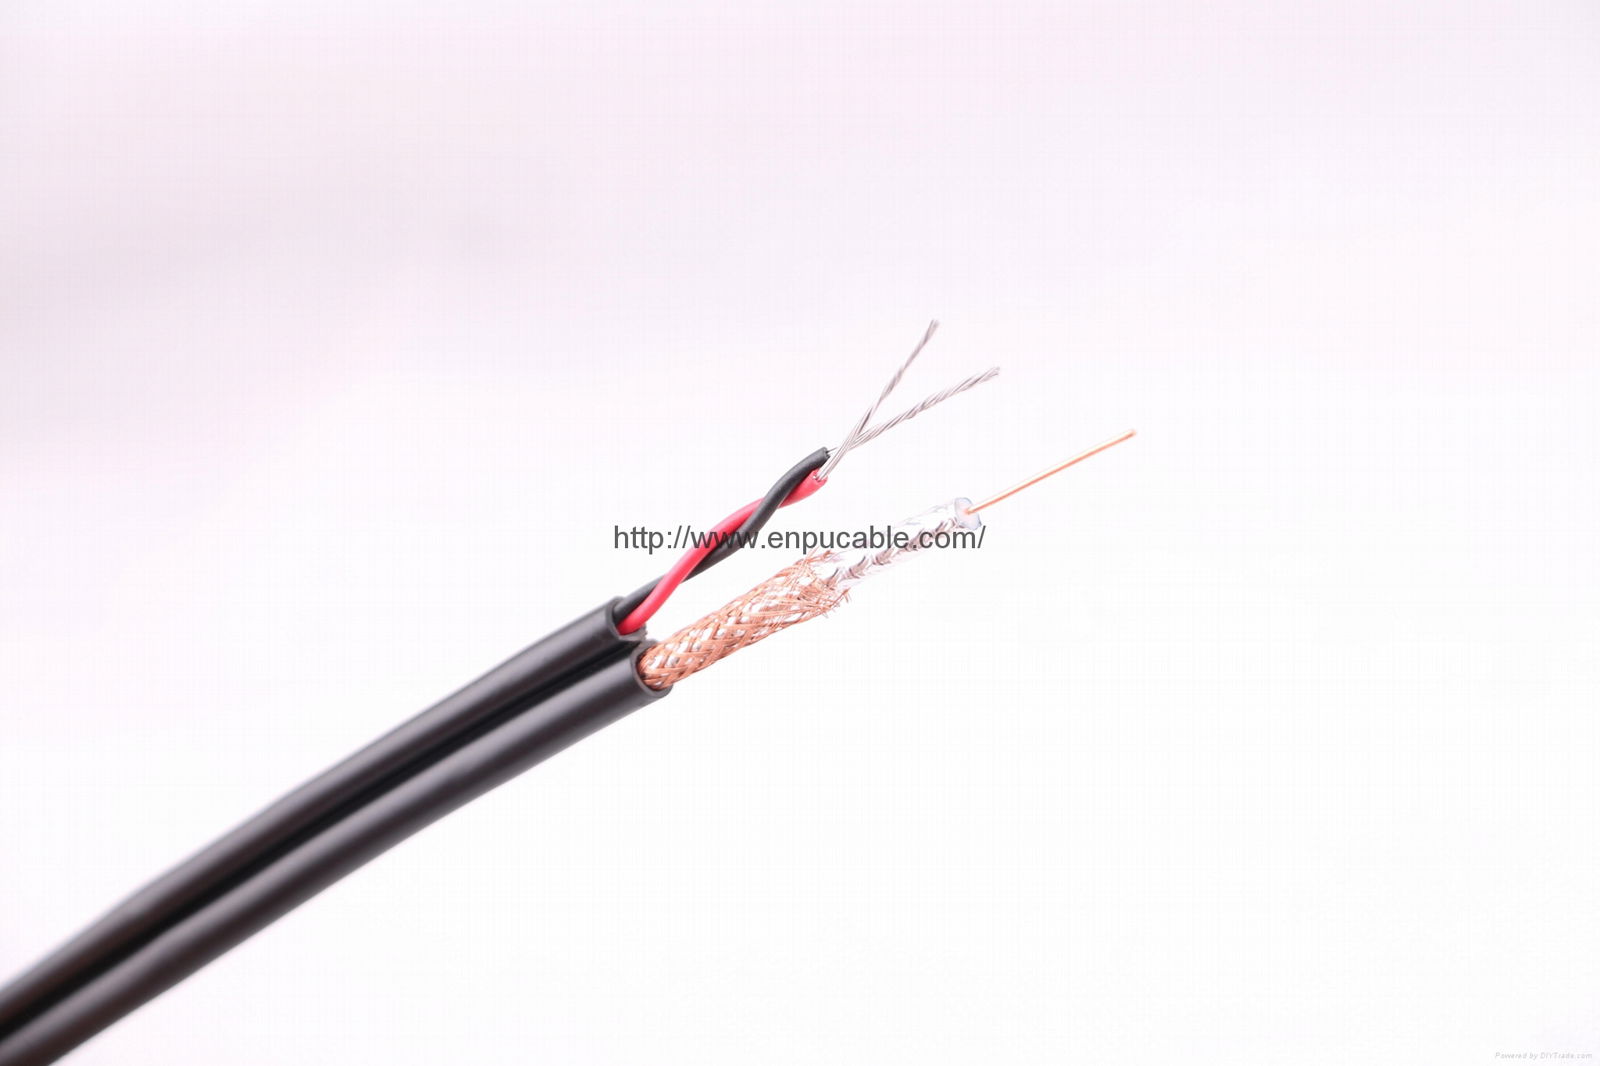  Siamese Coaxial Cable